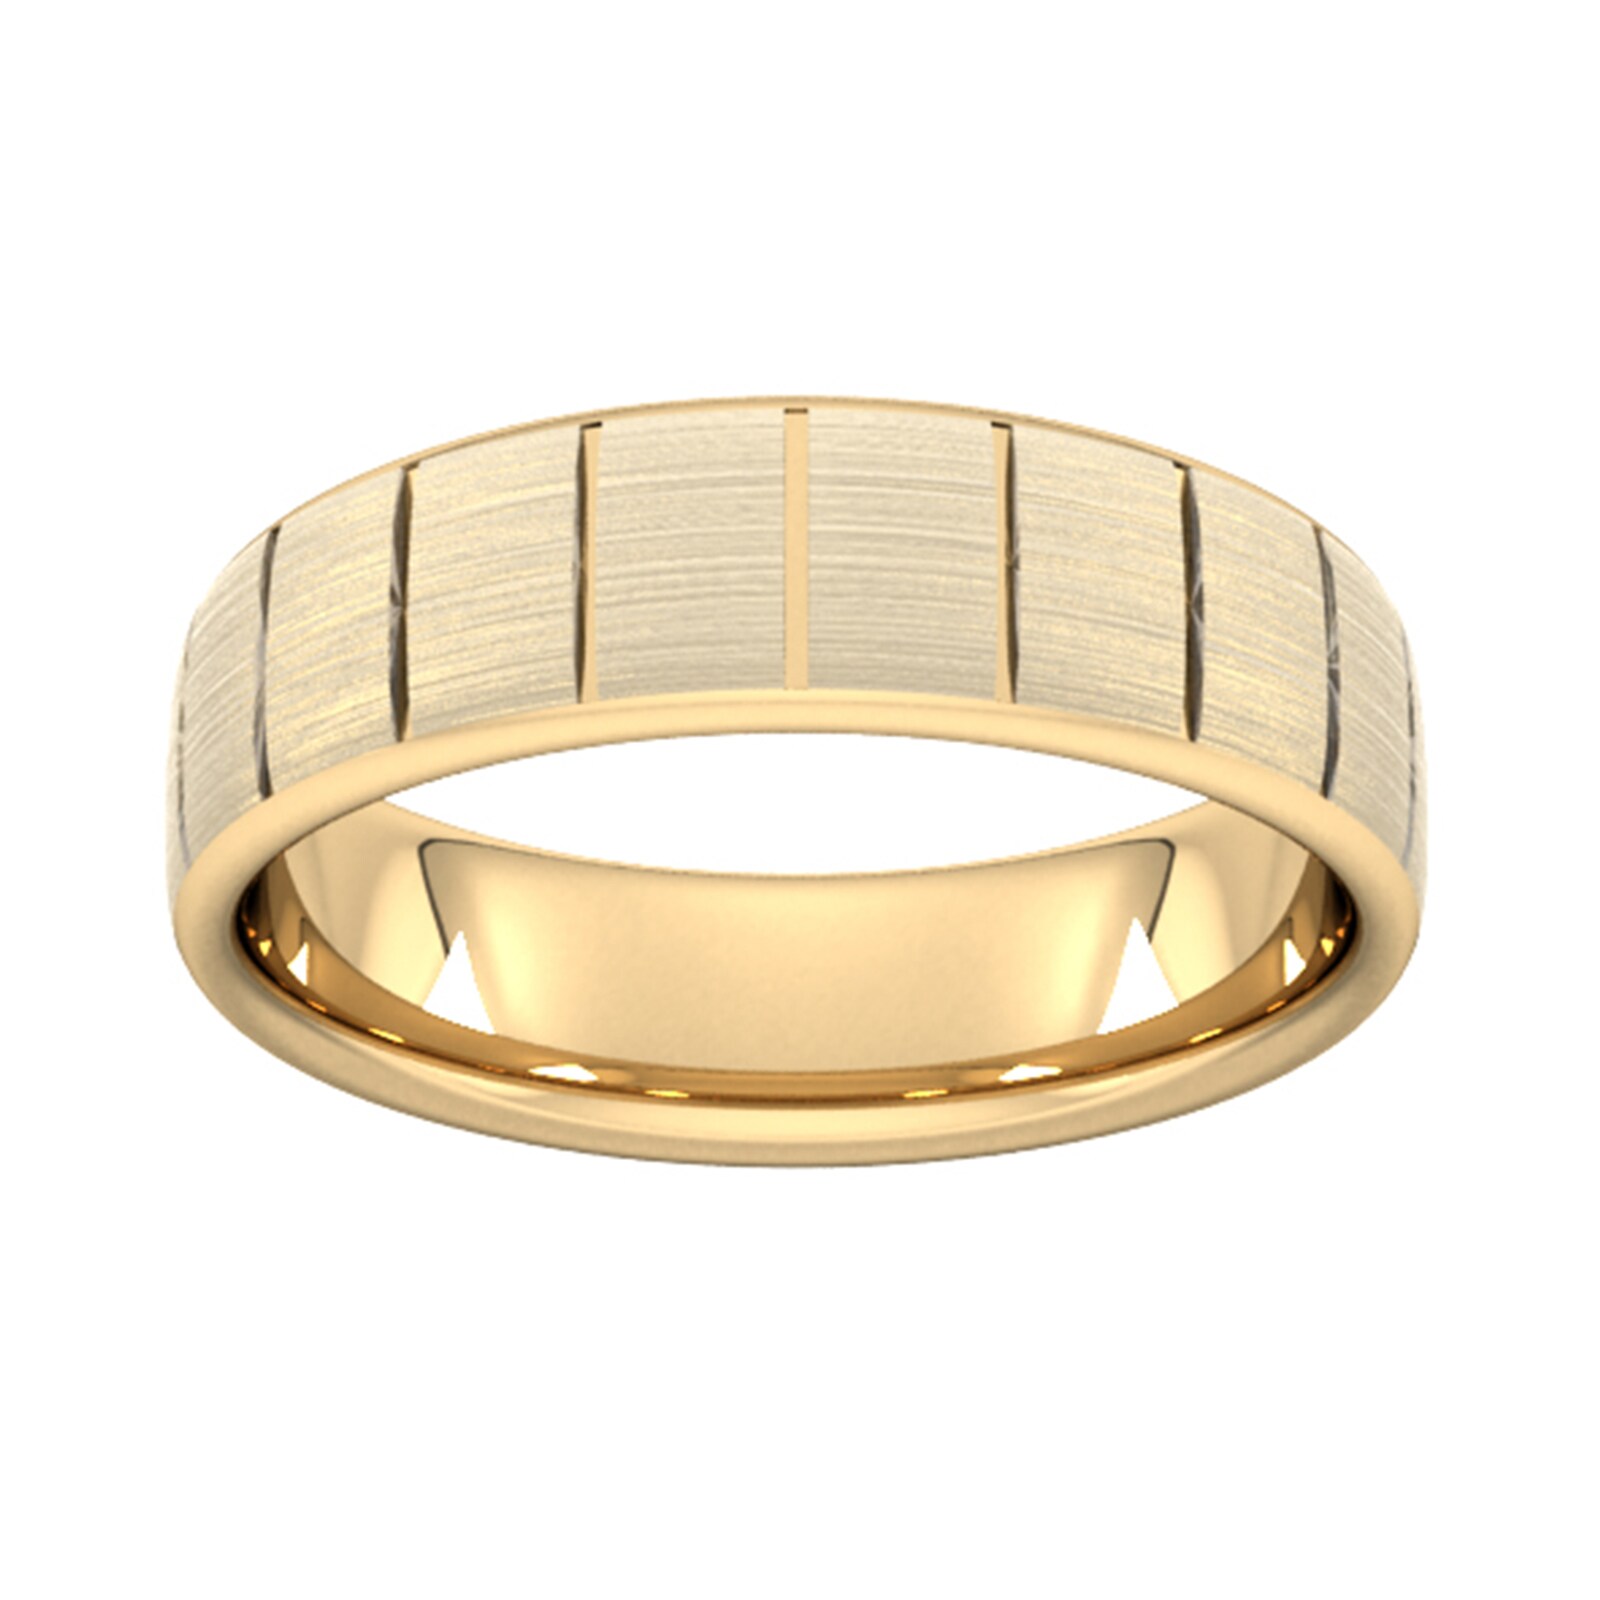 6mm Slight Court Standard Vertical Lines Wedding Ring In 18 Carat Yellow Gold - Ring Size L